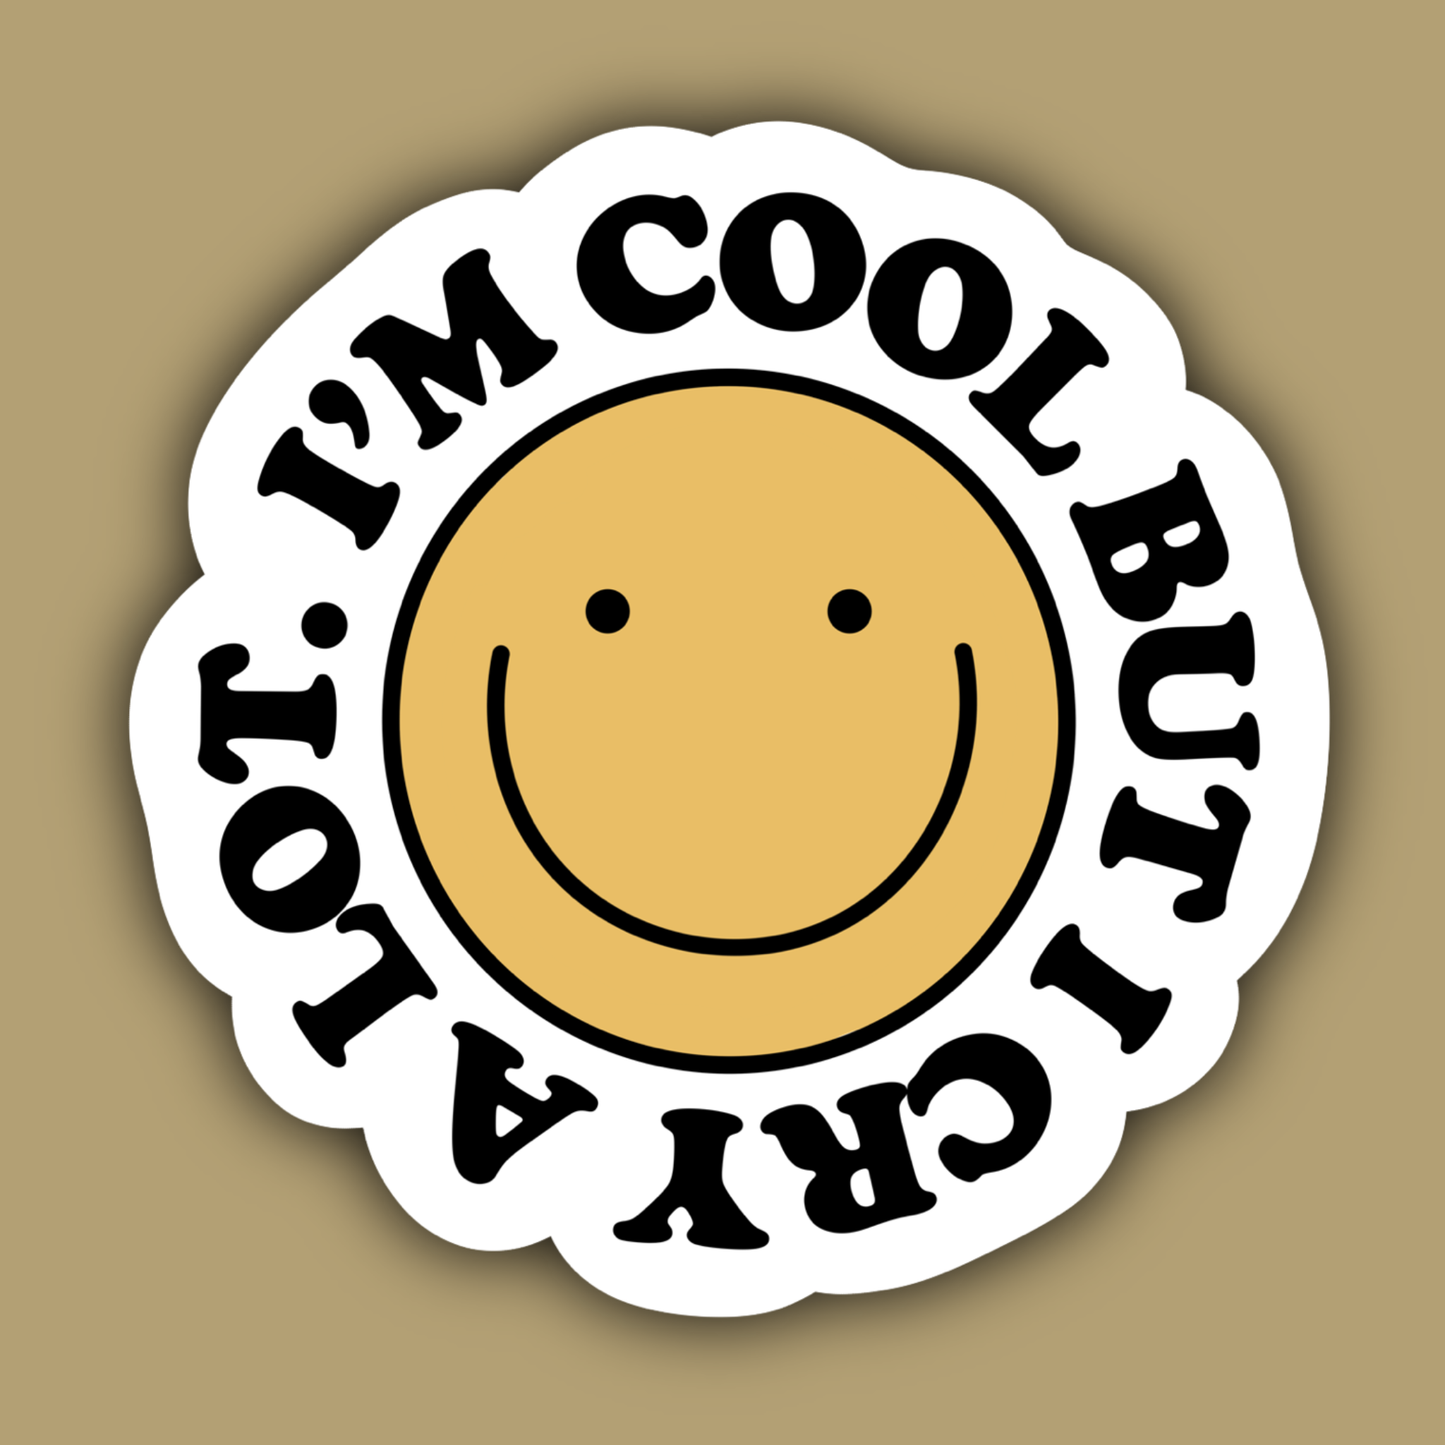 I'm Cool But I Cry a Lot Smiley Face Mental Health Sticker